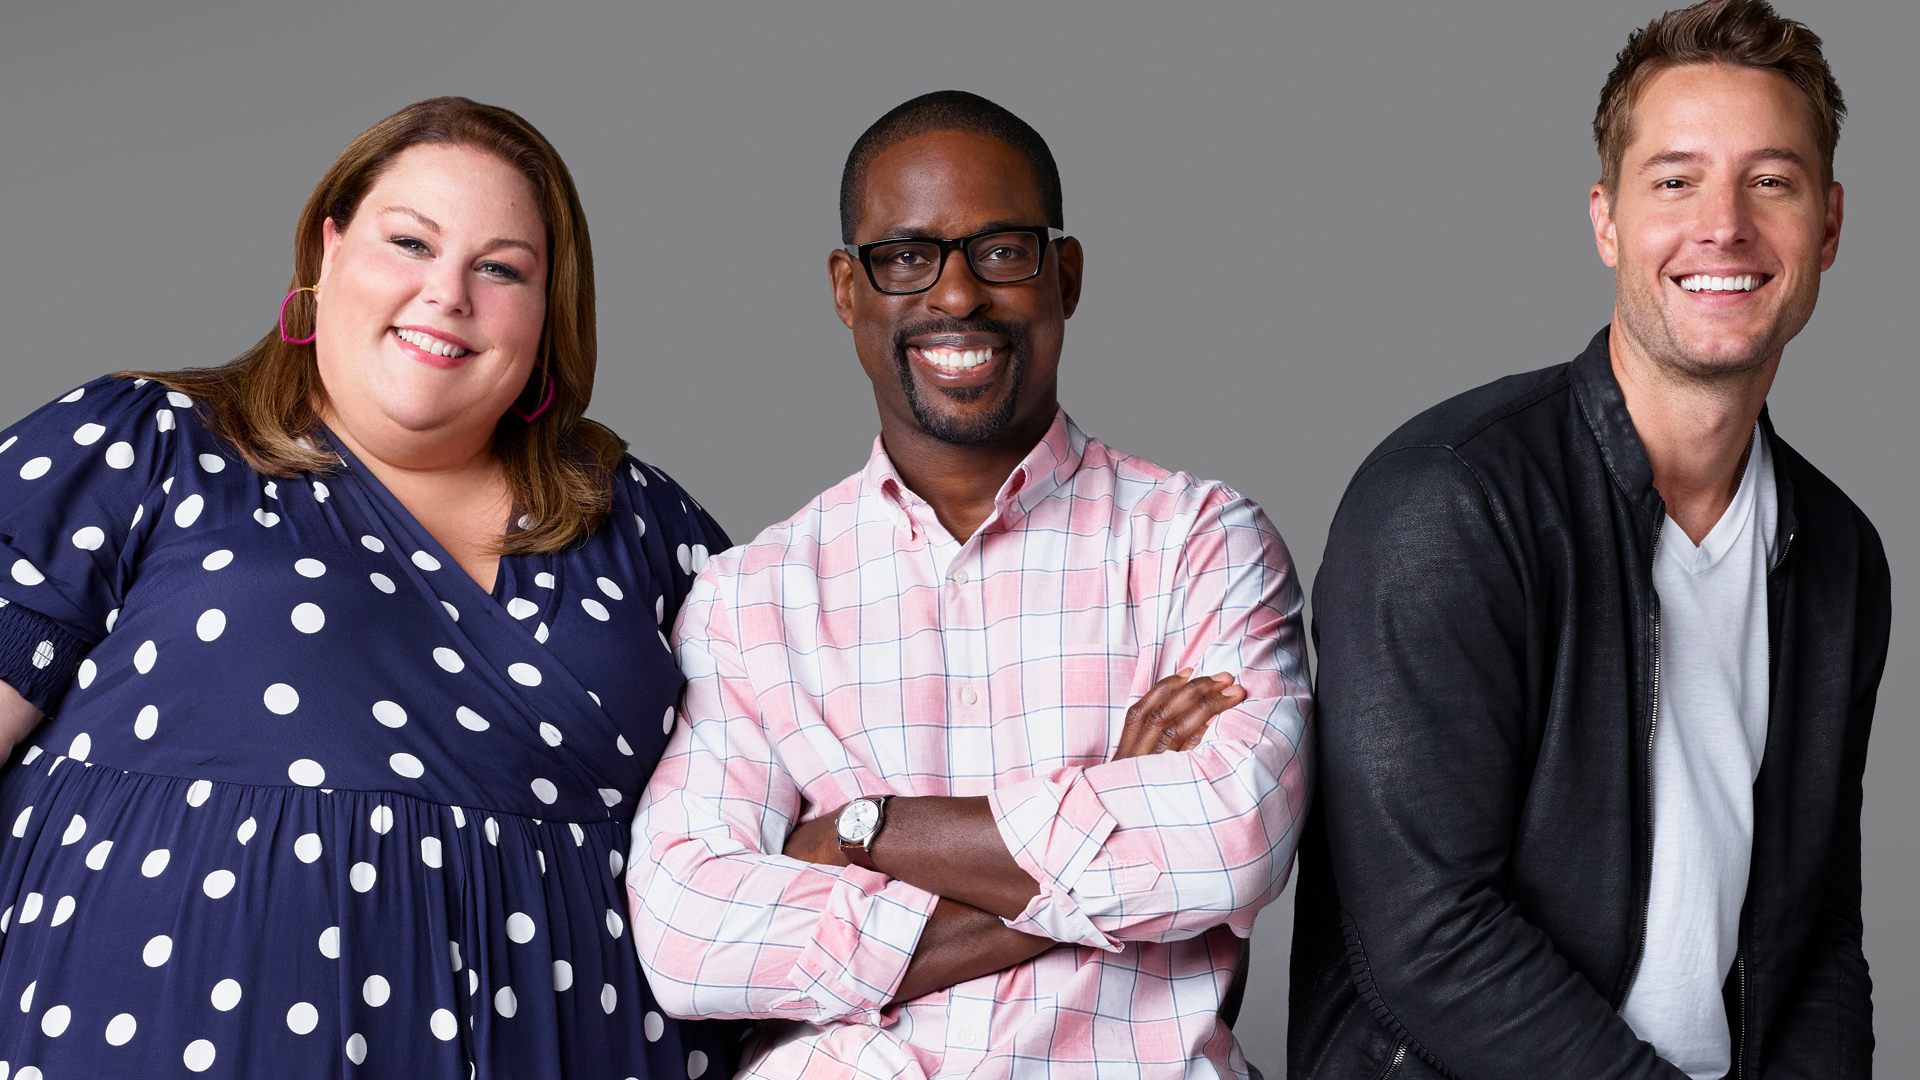 Chrissy Metz as Kate Pearson, Sterling K. Brown as Randall Pearson, Justin Hartley as Kevin Pearson on 'This Is Us'